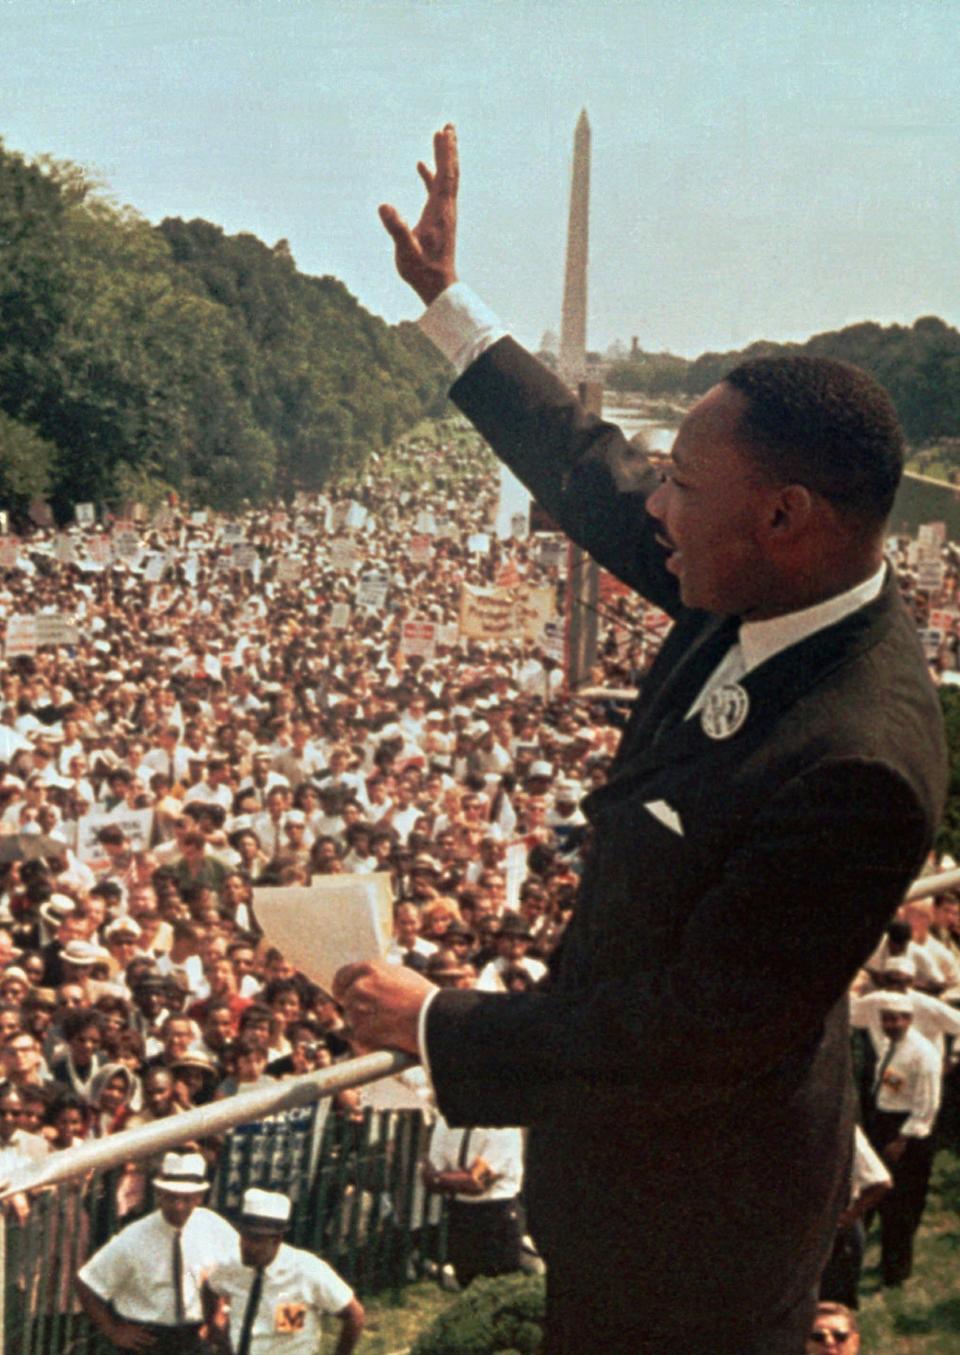 The Rev. Martin Luther King Jr. acknowledges the crowd at the Lincoln Memorial for his "I Have a Dream" speech during the March on Washington in this Aug. 28, 1963, file photo.